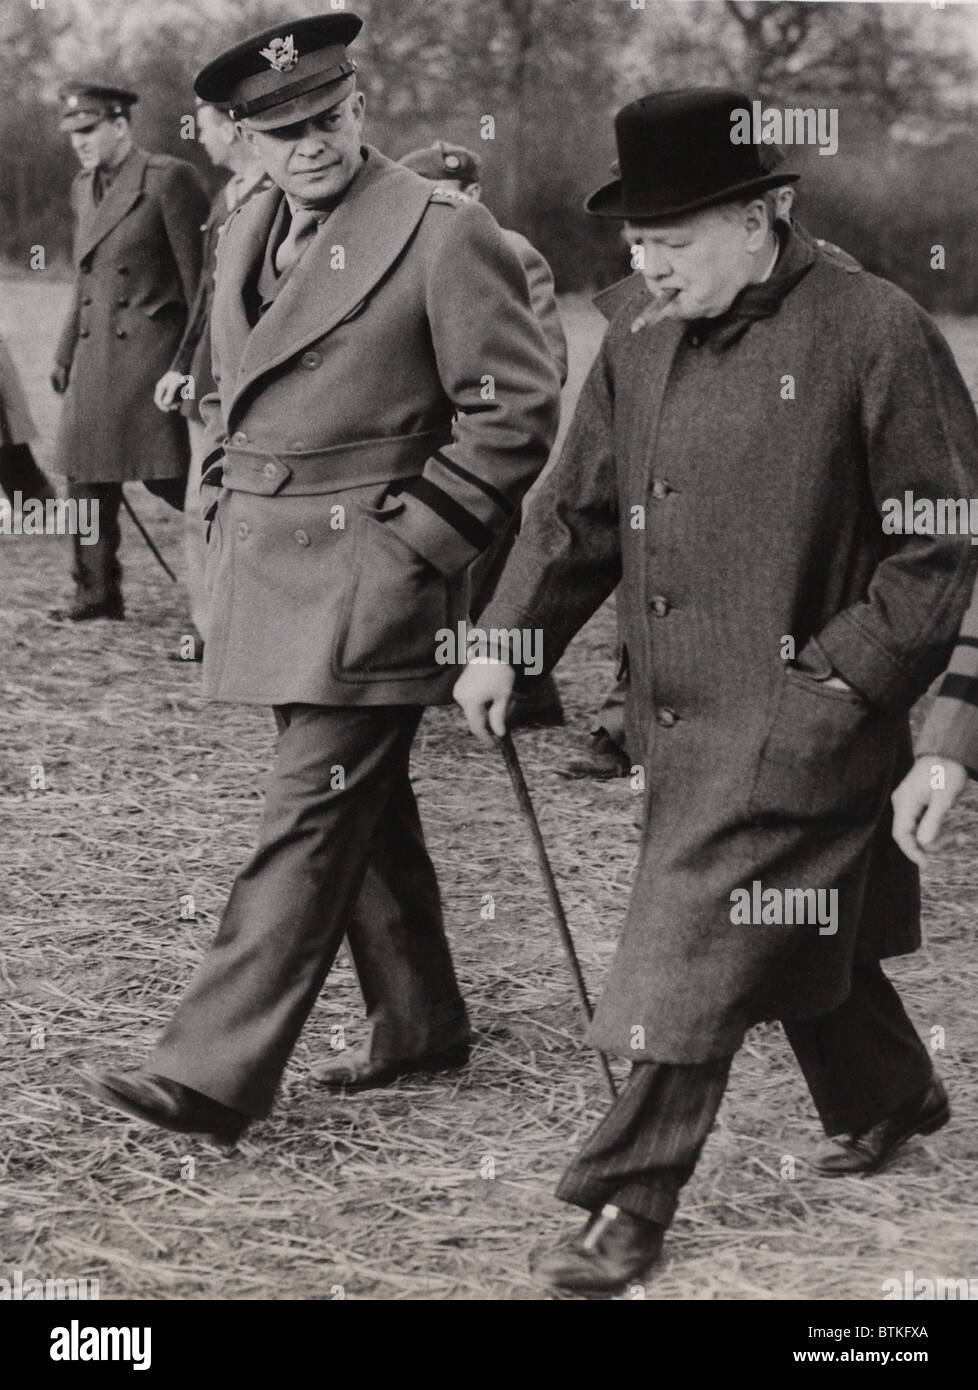 General Dwight Eisenhower, and Prime Minister Winston Churchill inspect a U.S. glider and paratroop invasion demonstration prior to the D-Day invasion of Normandy in 1944. Stock Photo